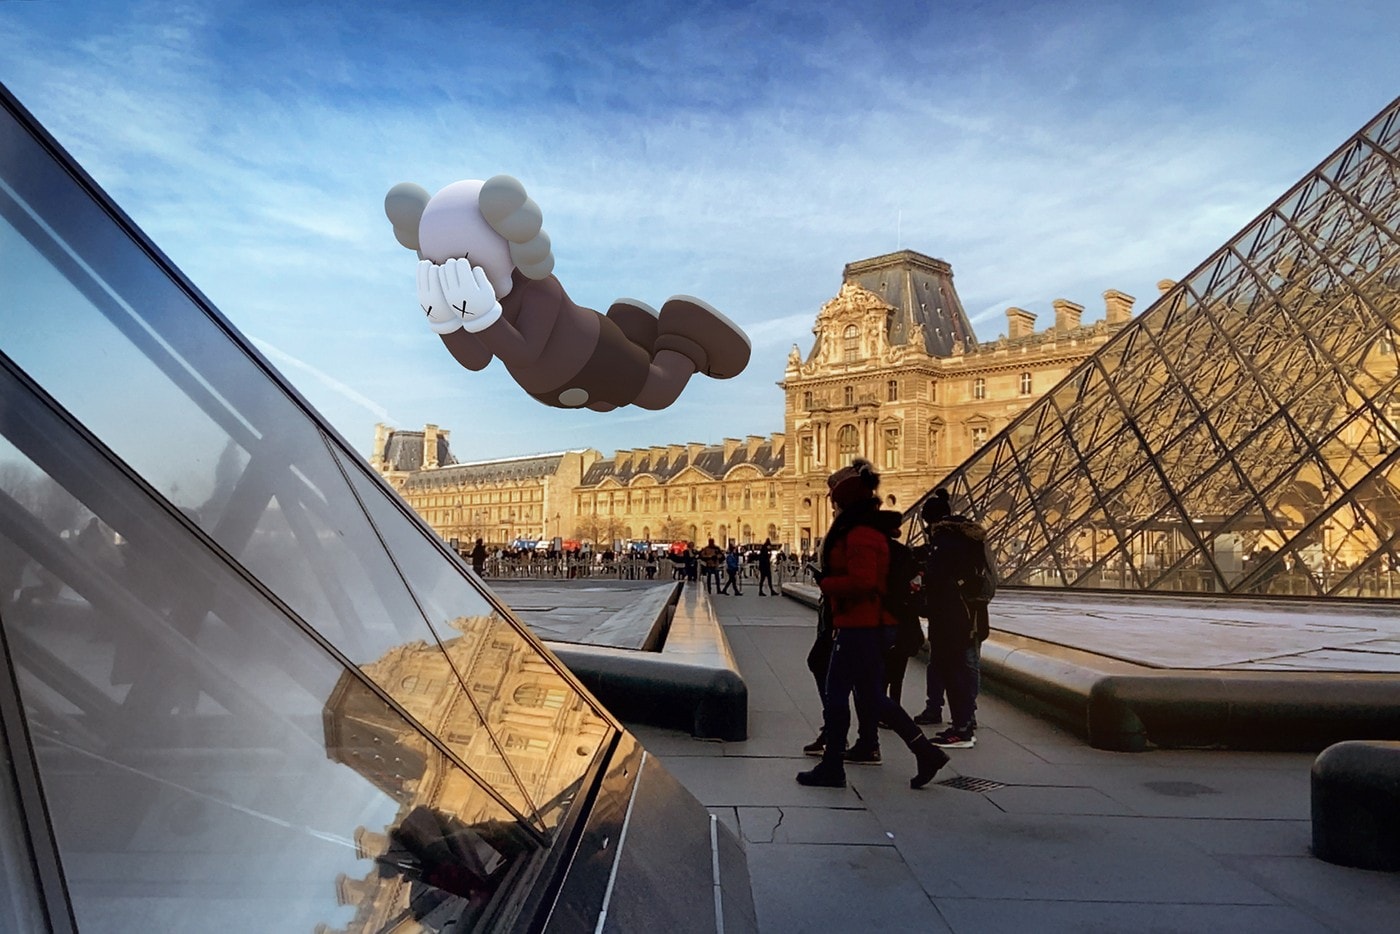 kaws companion sculpture acute art app collaboration expanded holiday augmented reality exhibition Brian donnelly